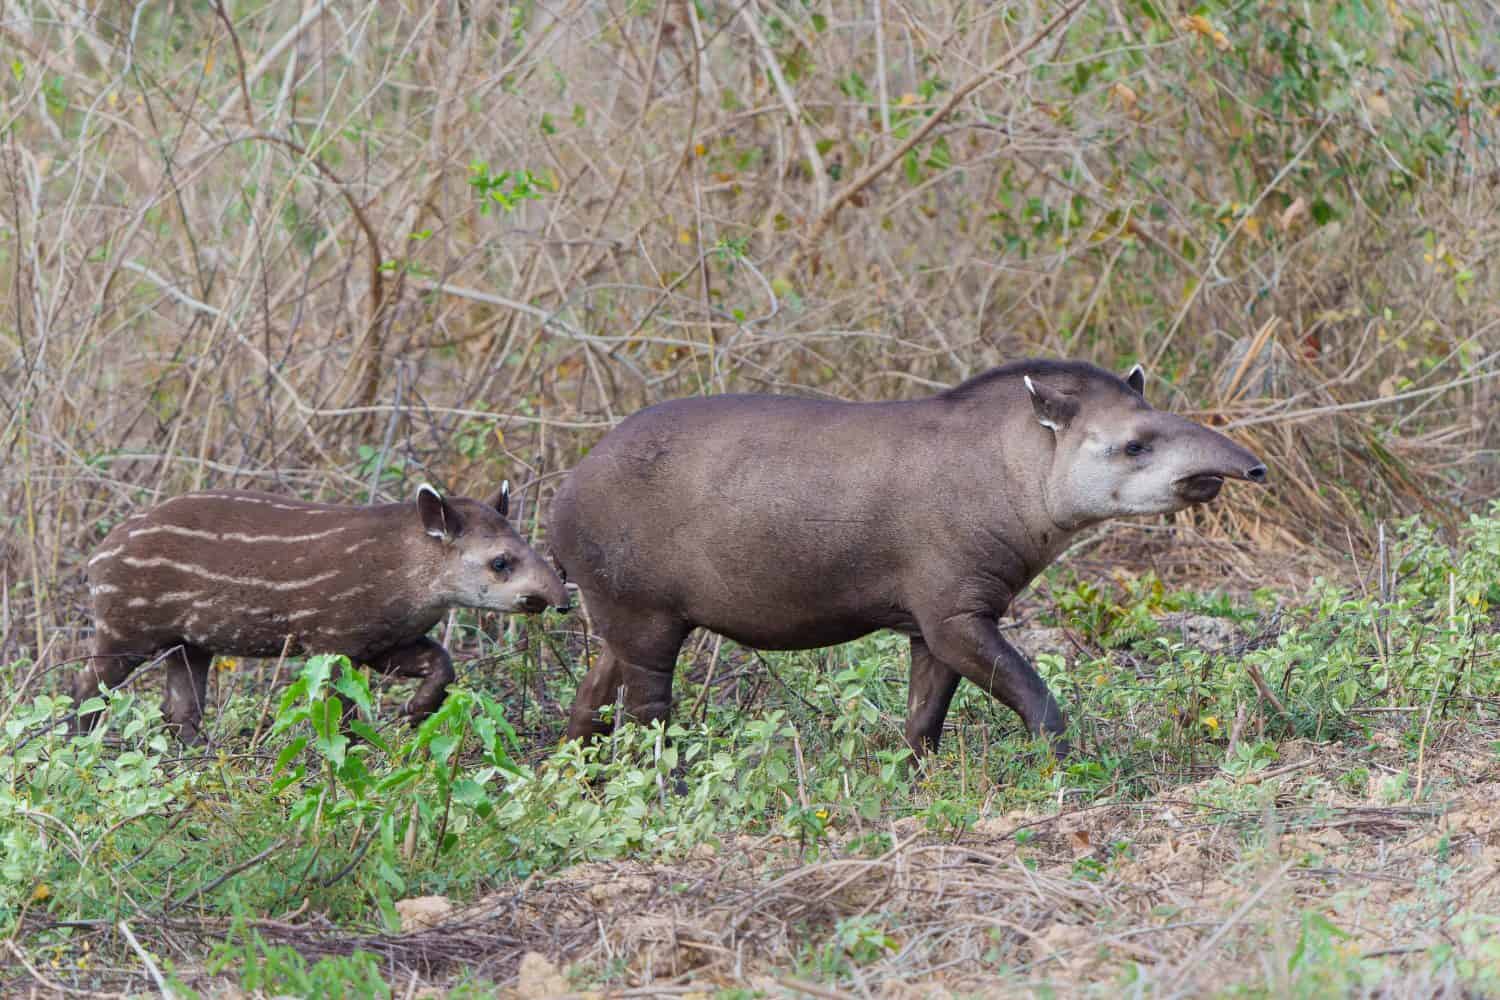 Mother Tapir and her cute striped calf. These South American tapirs (Tapirus terrestris), also commonly called the Brazilian tapir, where searching for fruit in the North Pantanal in Brazil.